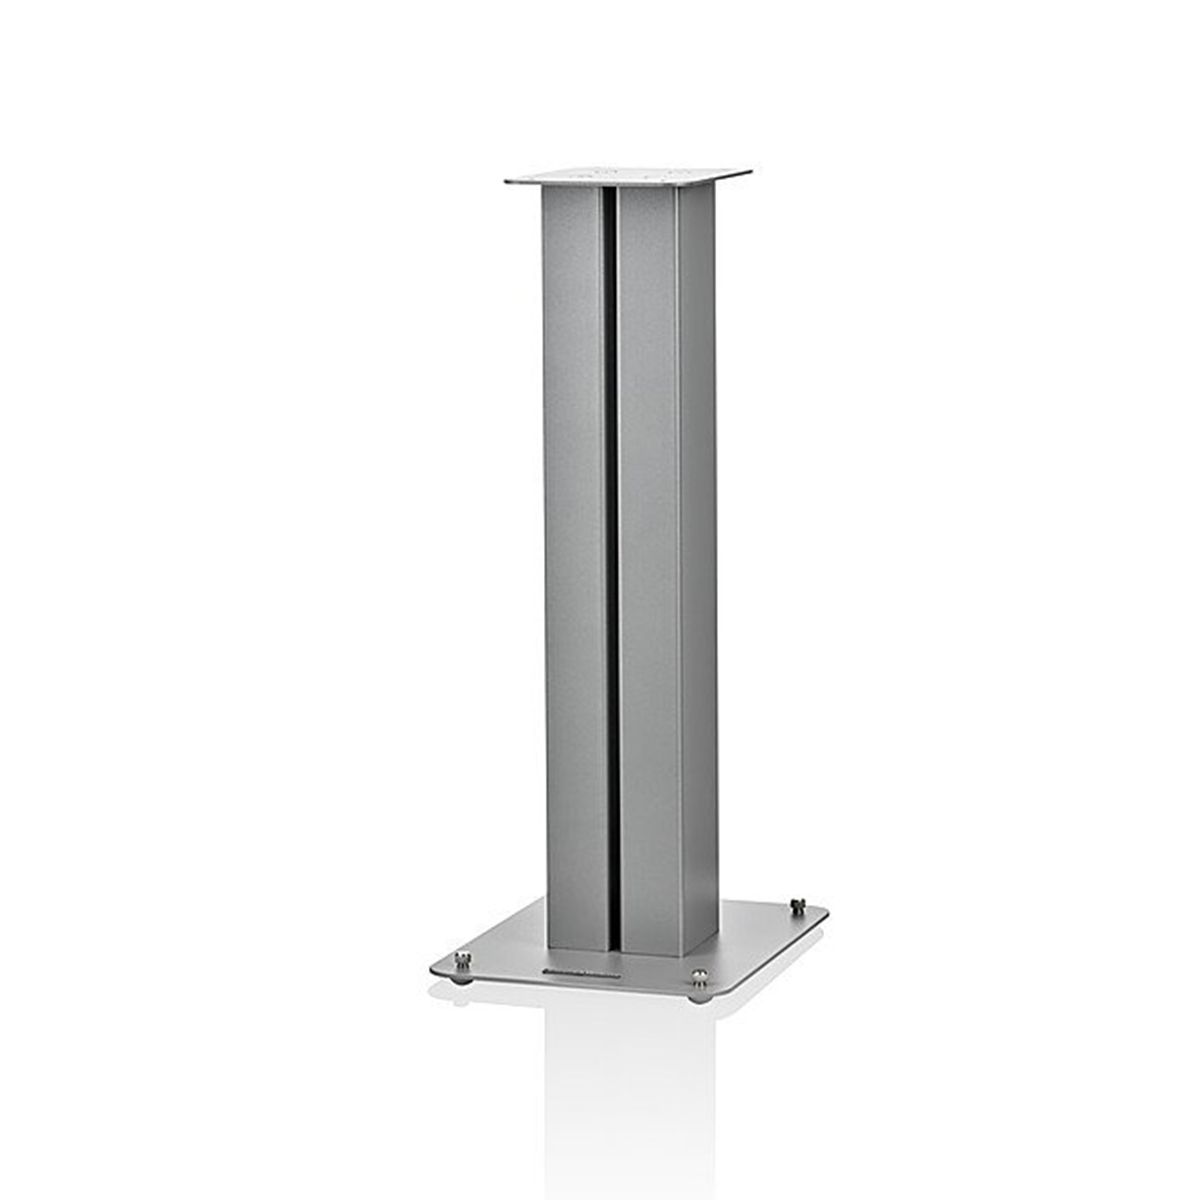 Bowers & Wilkins FS-600 S3 Speaker Stands - single silver - angled front view